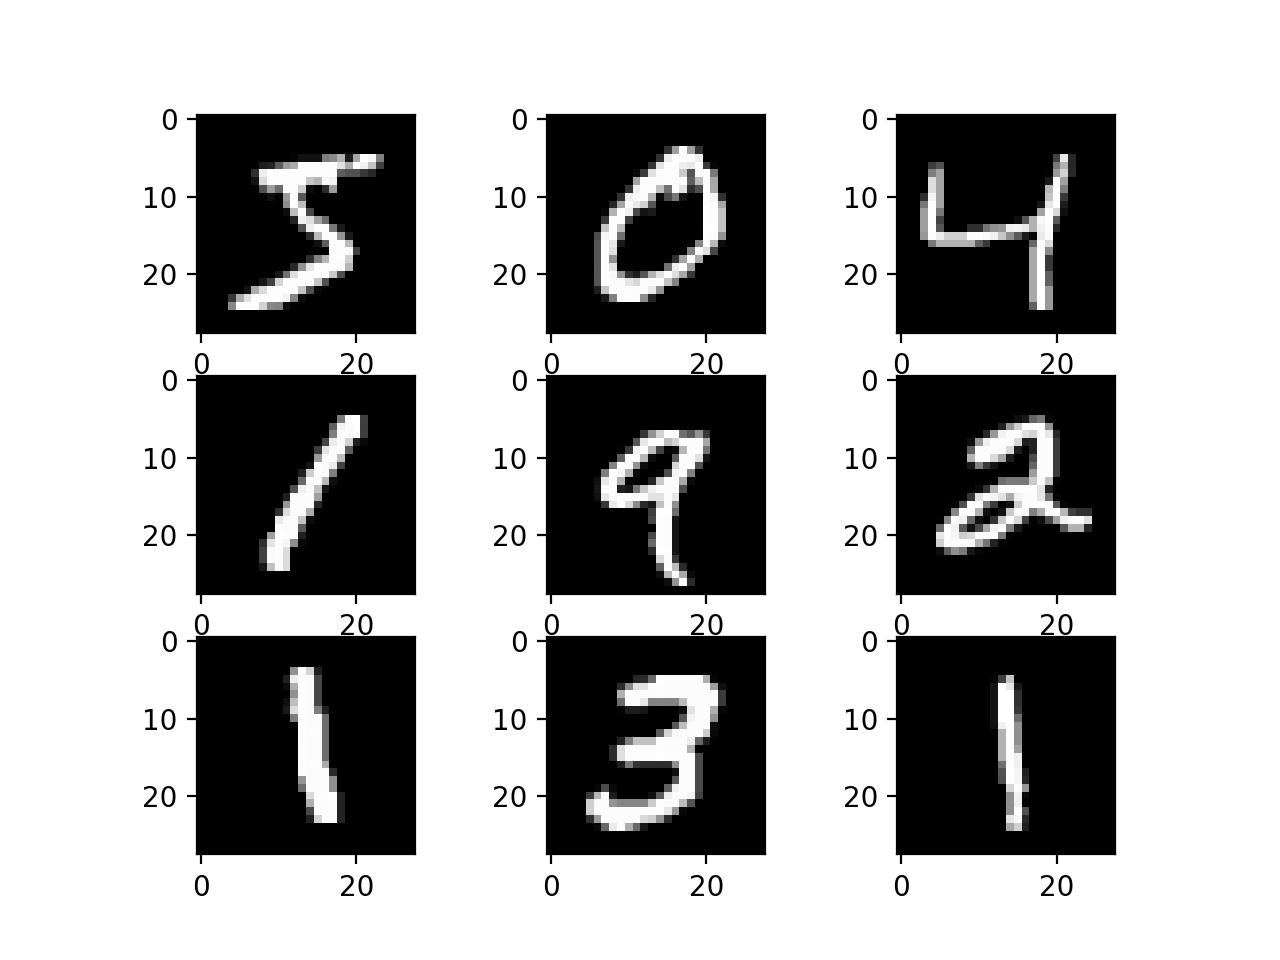 Excerpts from MNIST dataset.